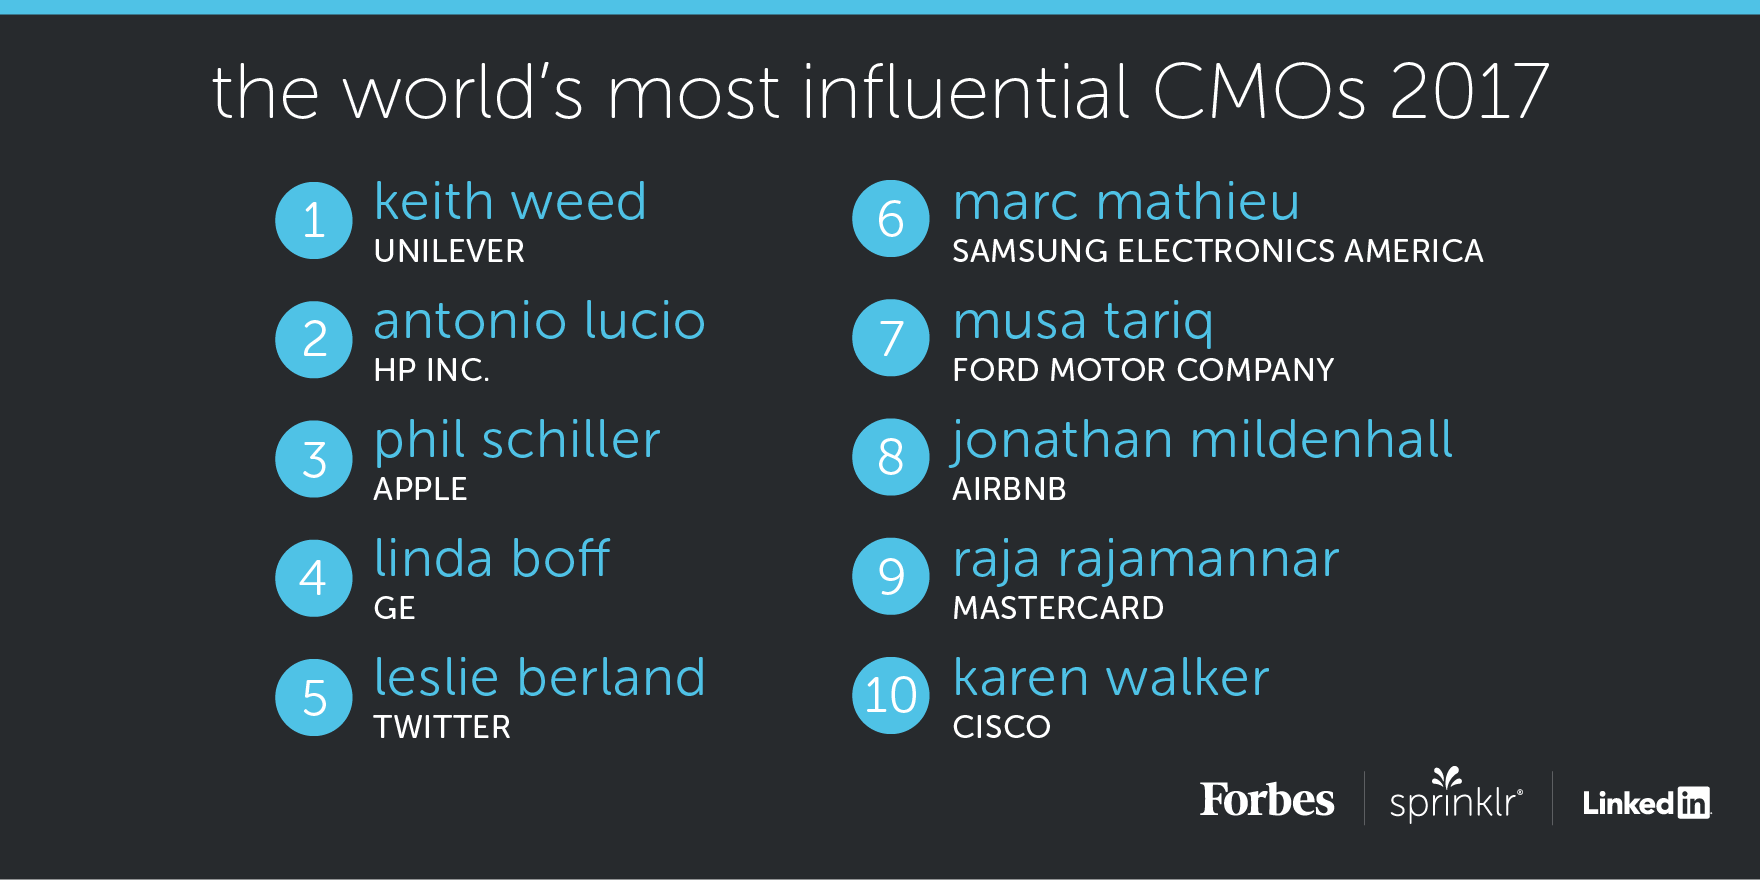 Partnering with Forbes to Identify the World’s Most Influential CMOs